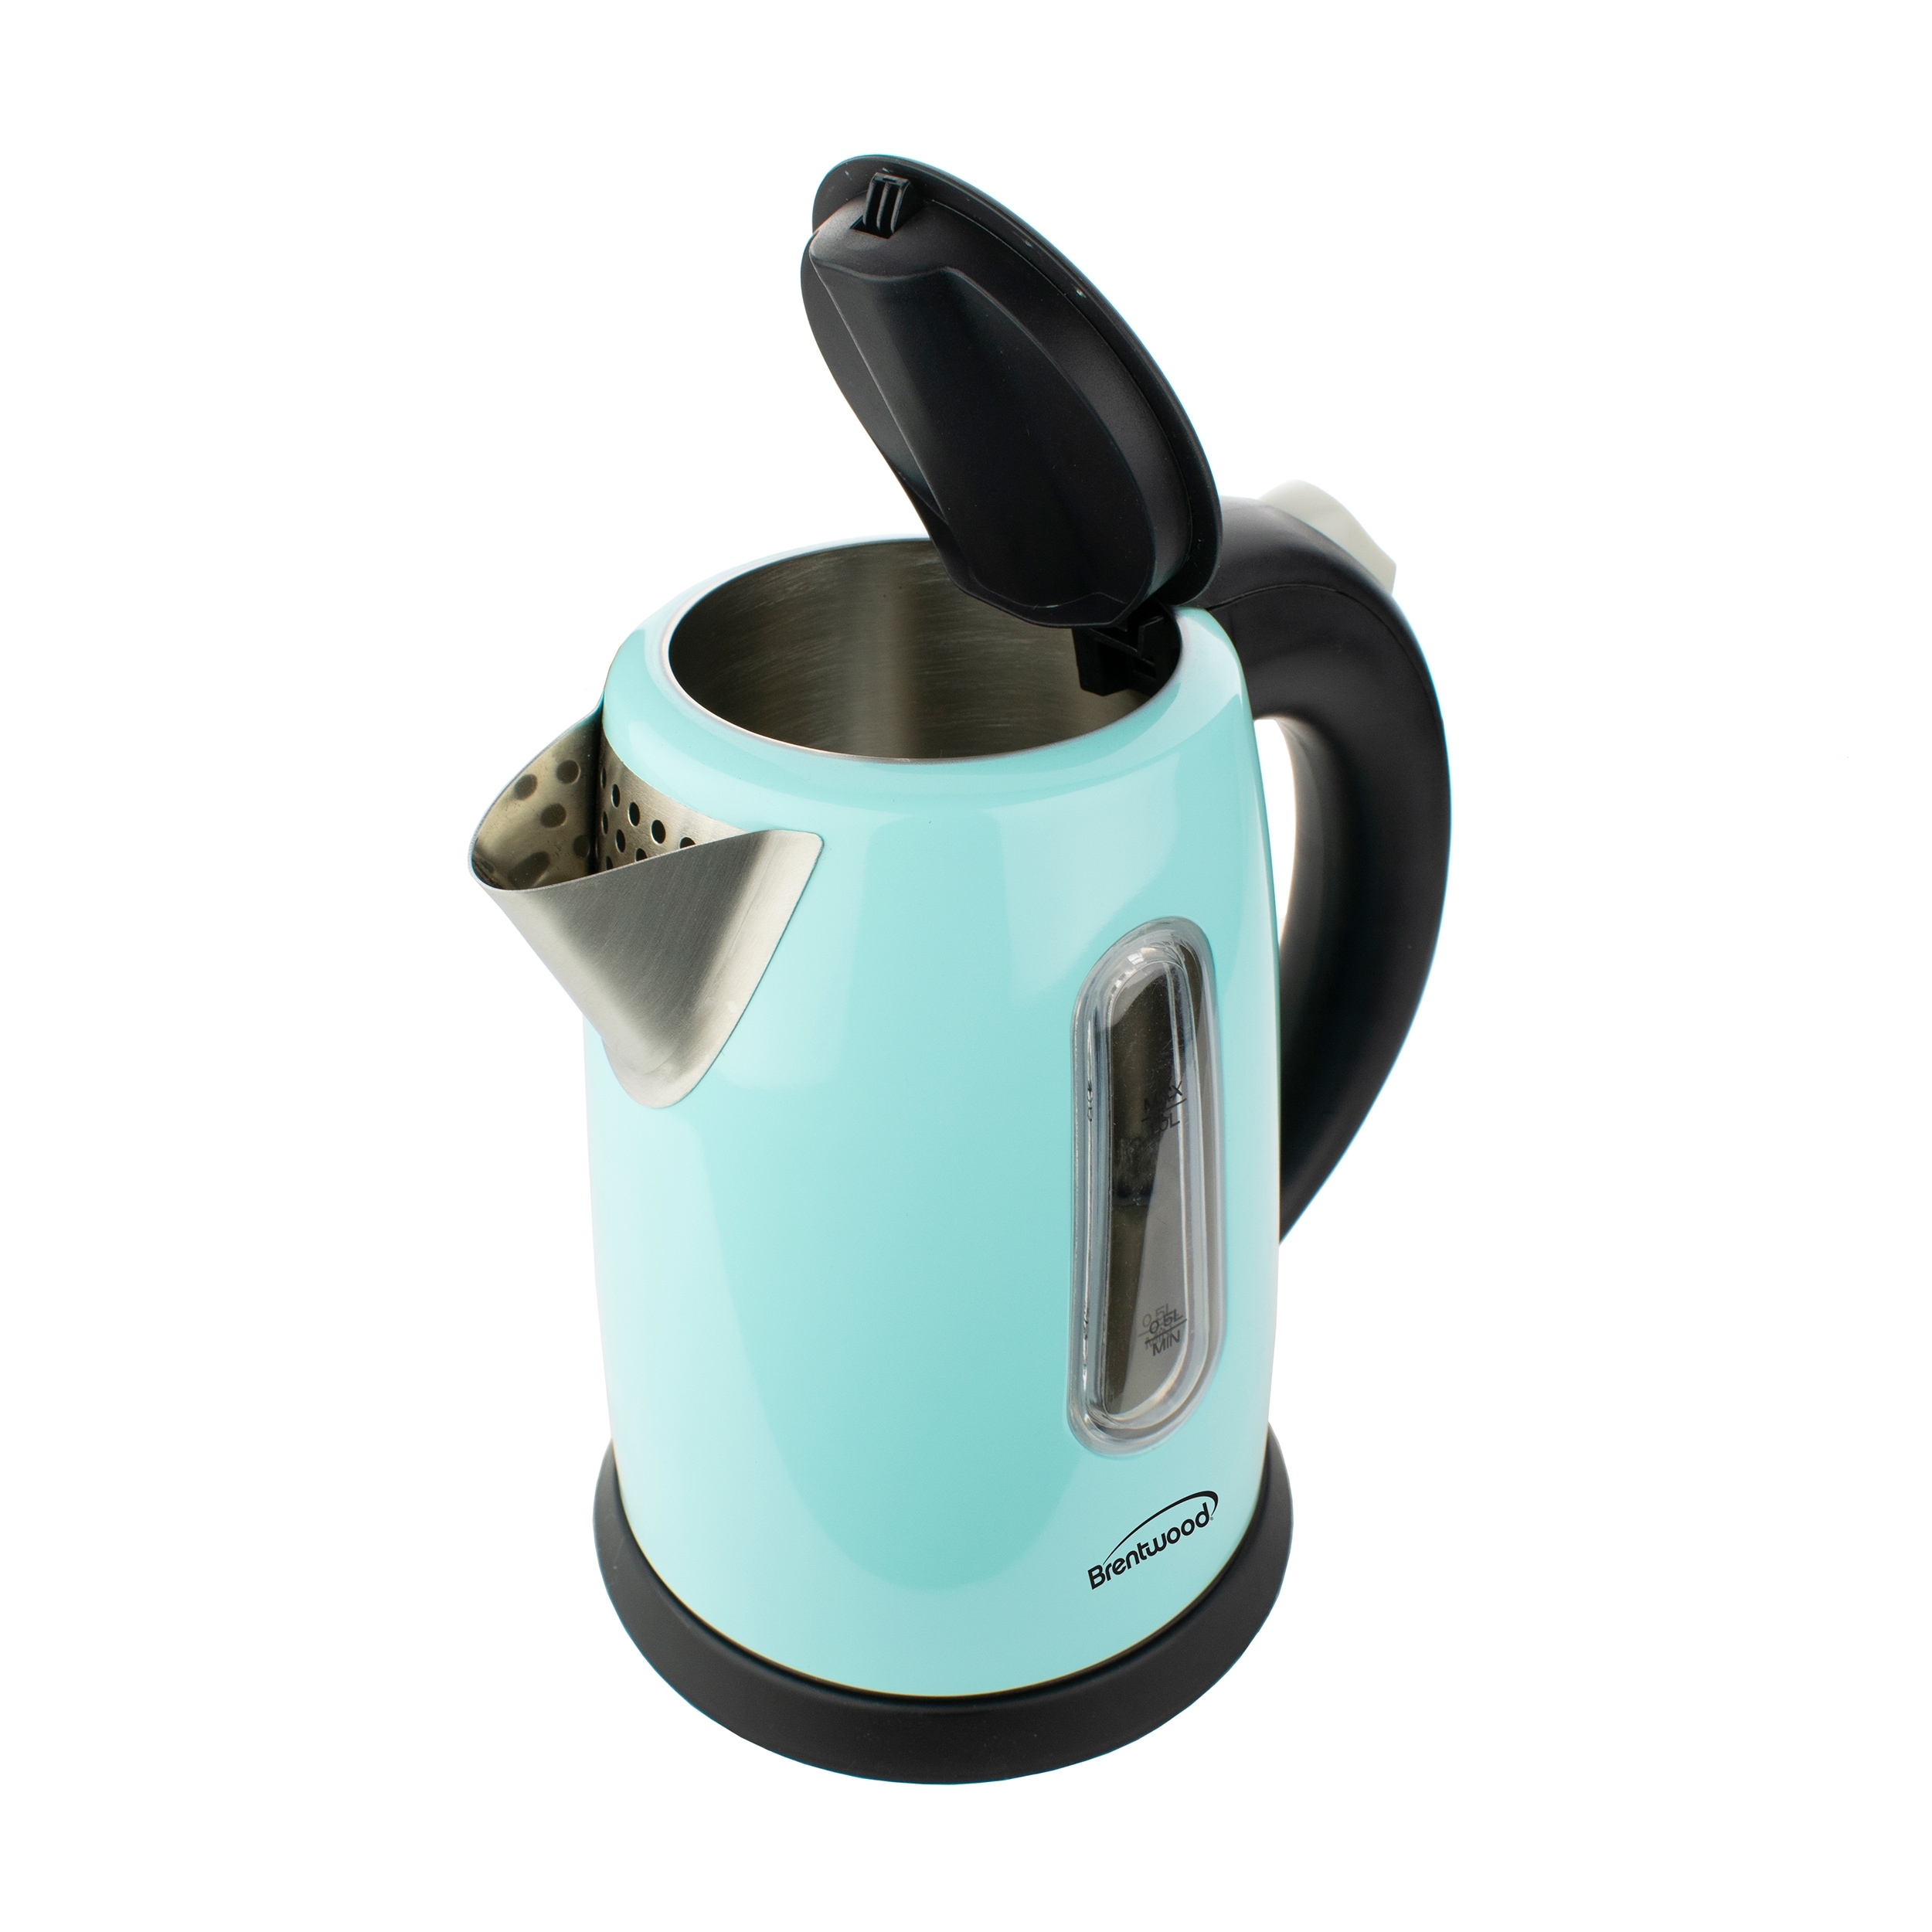 https://ak1.ostkcdn.com/images/products/is/images/direct/5e2267865fe048dd859658250c5d2d832578c264/4.2-Cup-Stainless-Steel-Cordless-Electric-Kettle-in-Teal.jpg